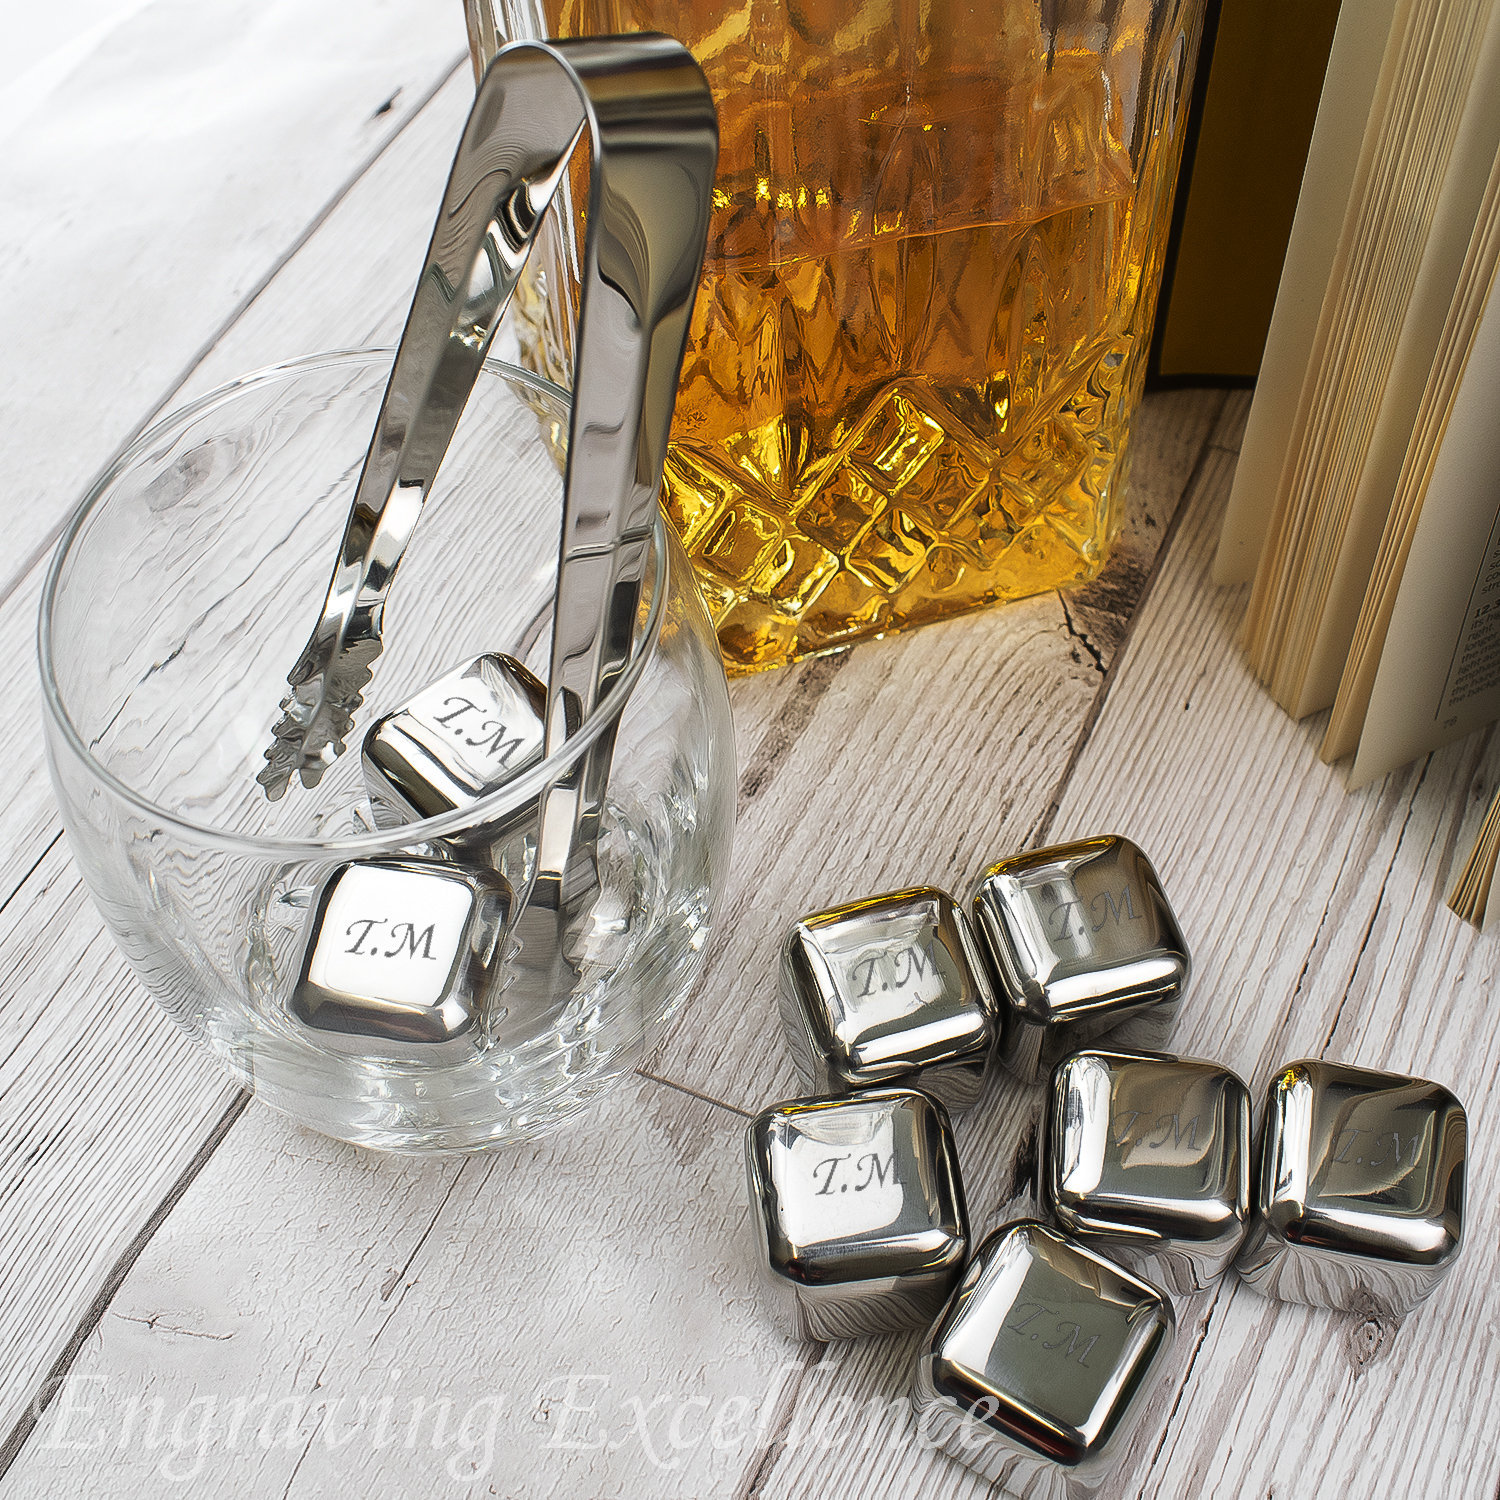 Whiskey Stones Reusable Ice Cubes with Silicone Square Ice Molds